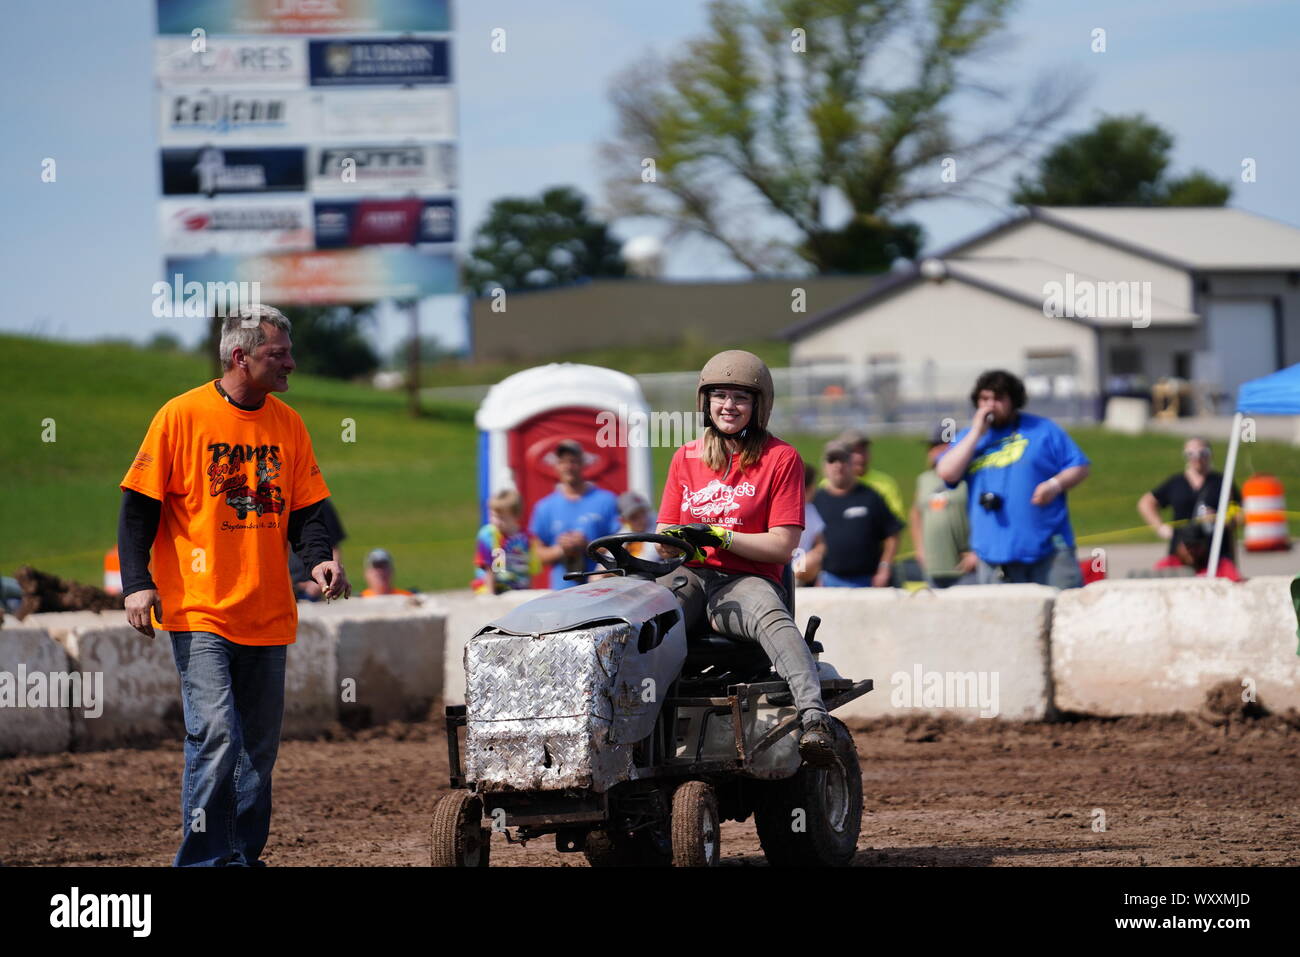 Hollywood Motorsports held their Demolition Derby event Paws for the Cause to help raise funds for local humane societies, Oshkosh, Wisconsin Stock Photo